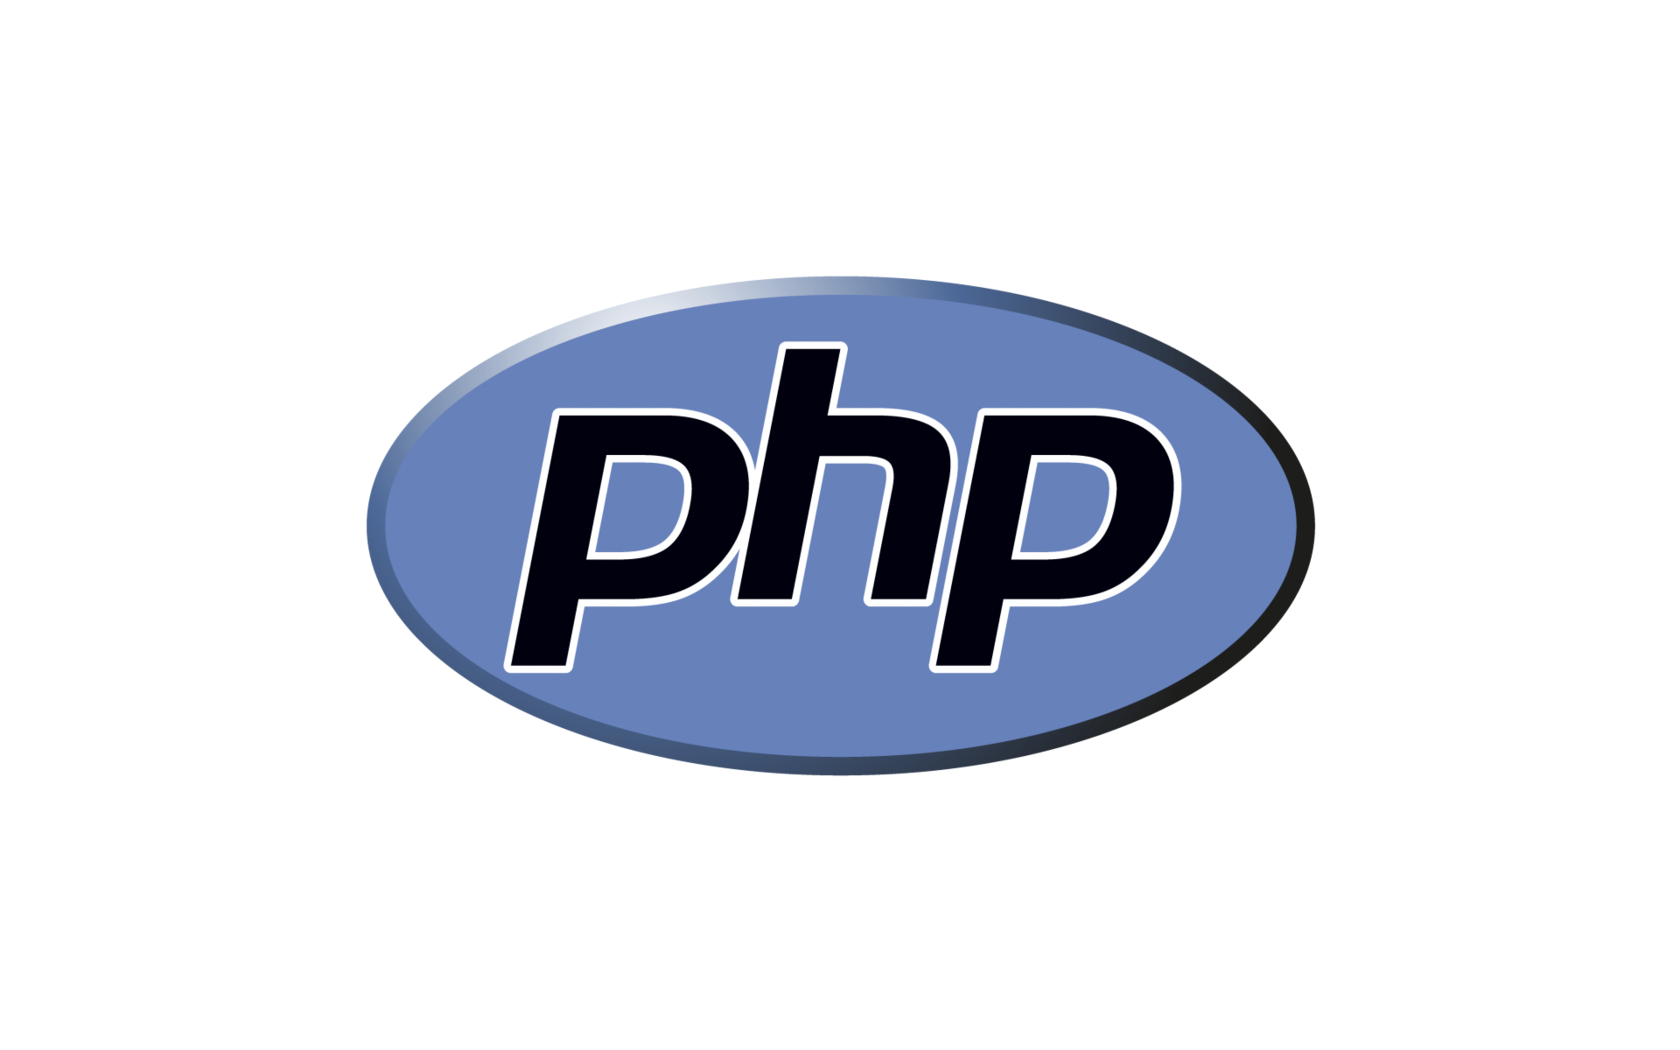 User php 1. Php логотип. Php иконка. Php картинка. Php логотип без фона.